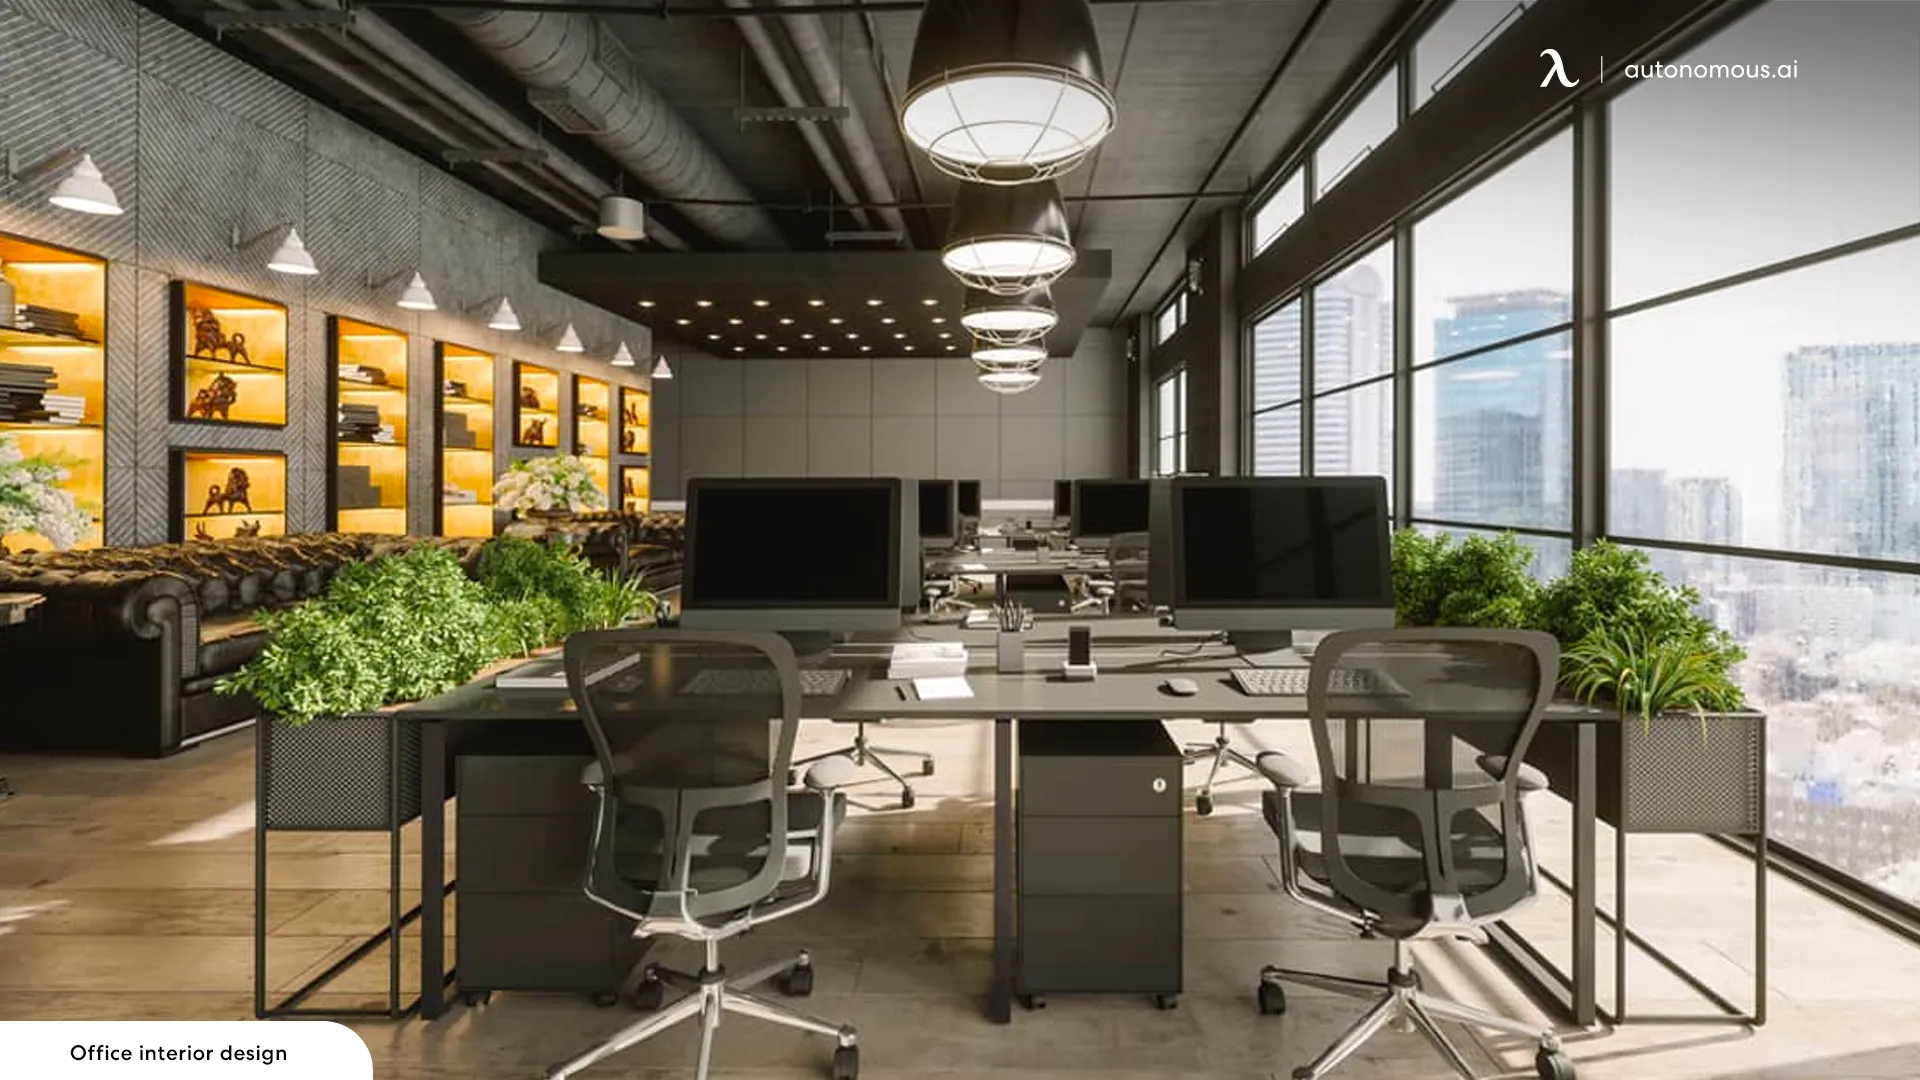 Use energy-efficient lighting - sustainable office design